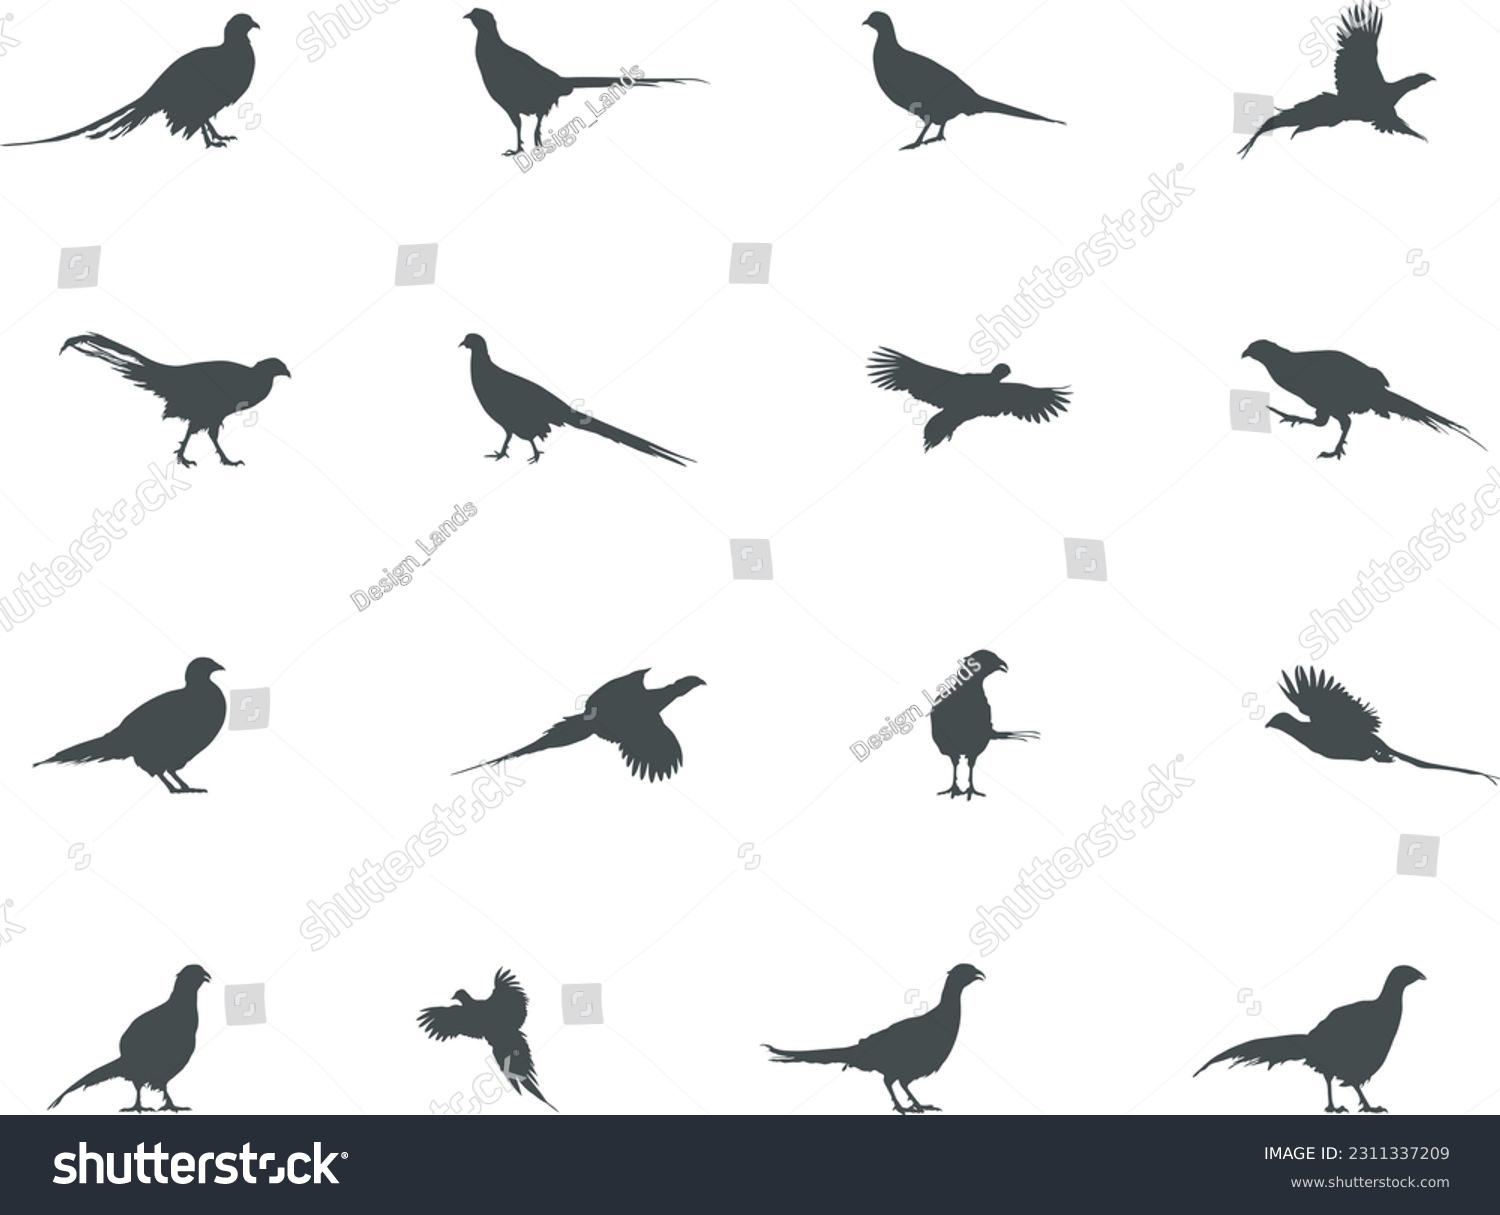 SVG of Pheasant silhouette, Flying pheasant silhouette, Pheasant SVG, Pheasant silhouette clip art. svg